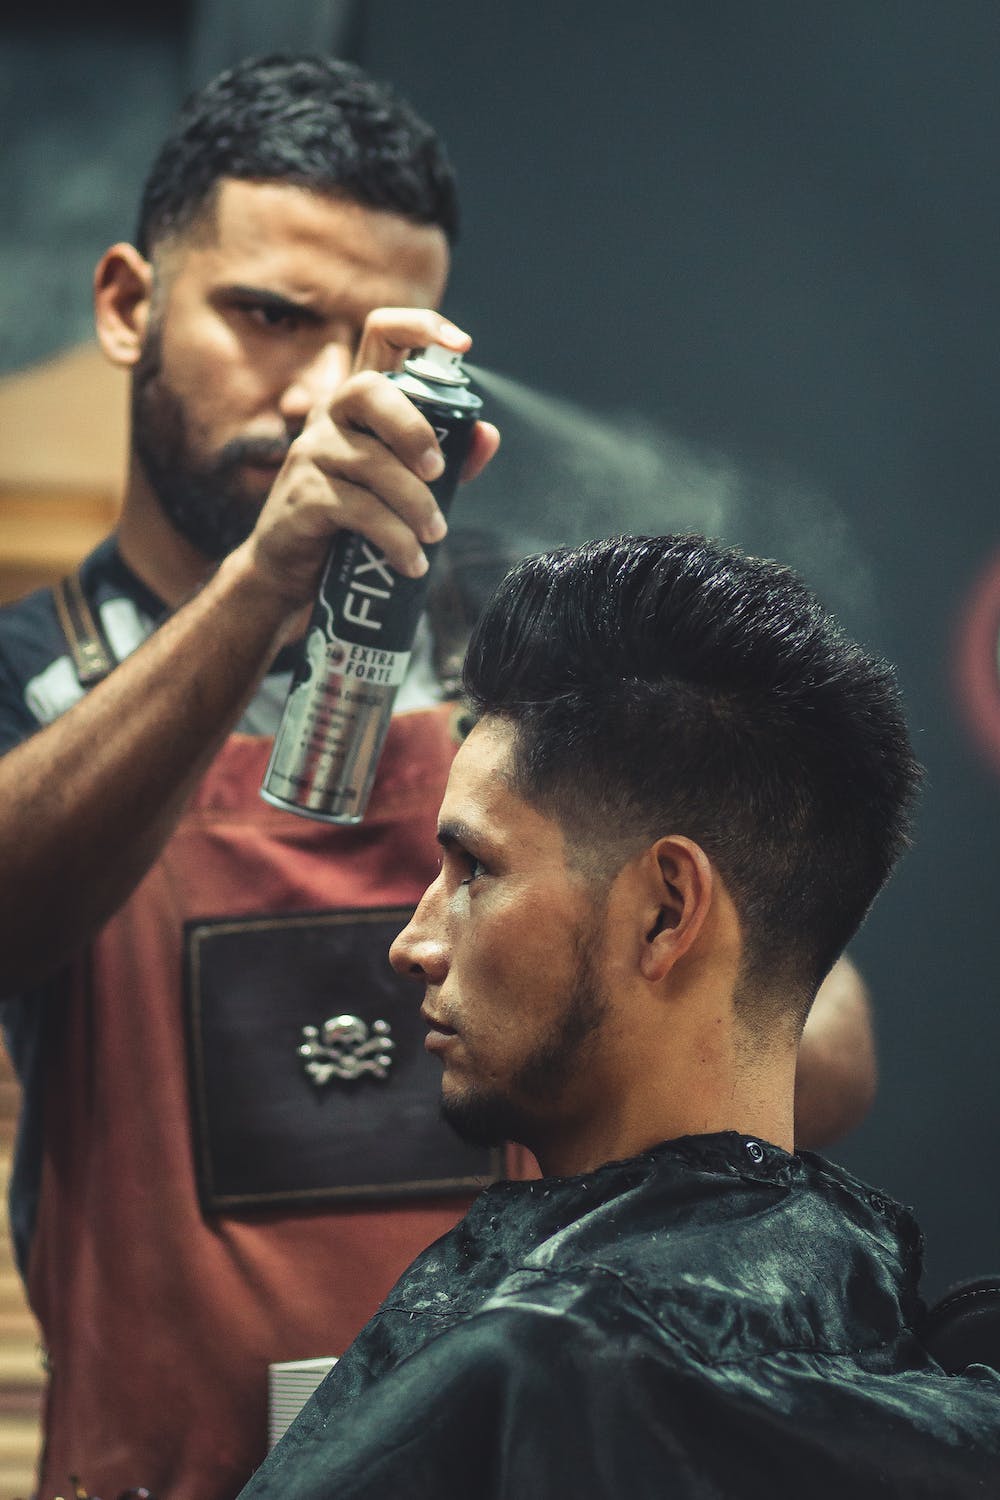 Barber spraying gel into customers freshly cut hair to maintain shape of design